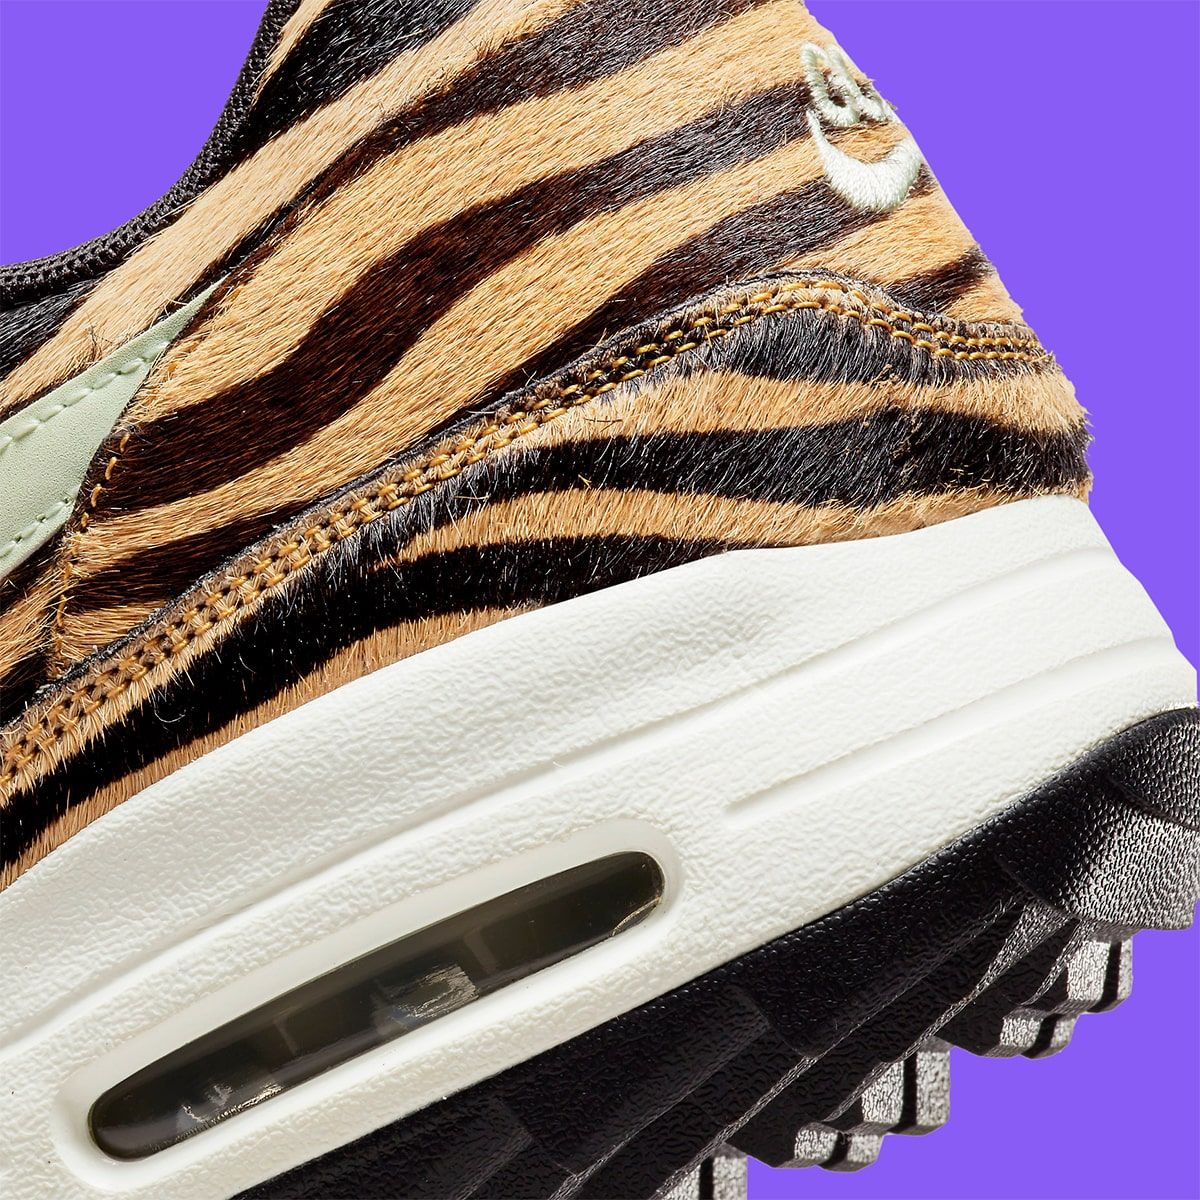 Official Images // Nike Air Max 1 Golf “Tiger” | House of Heat°